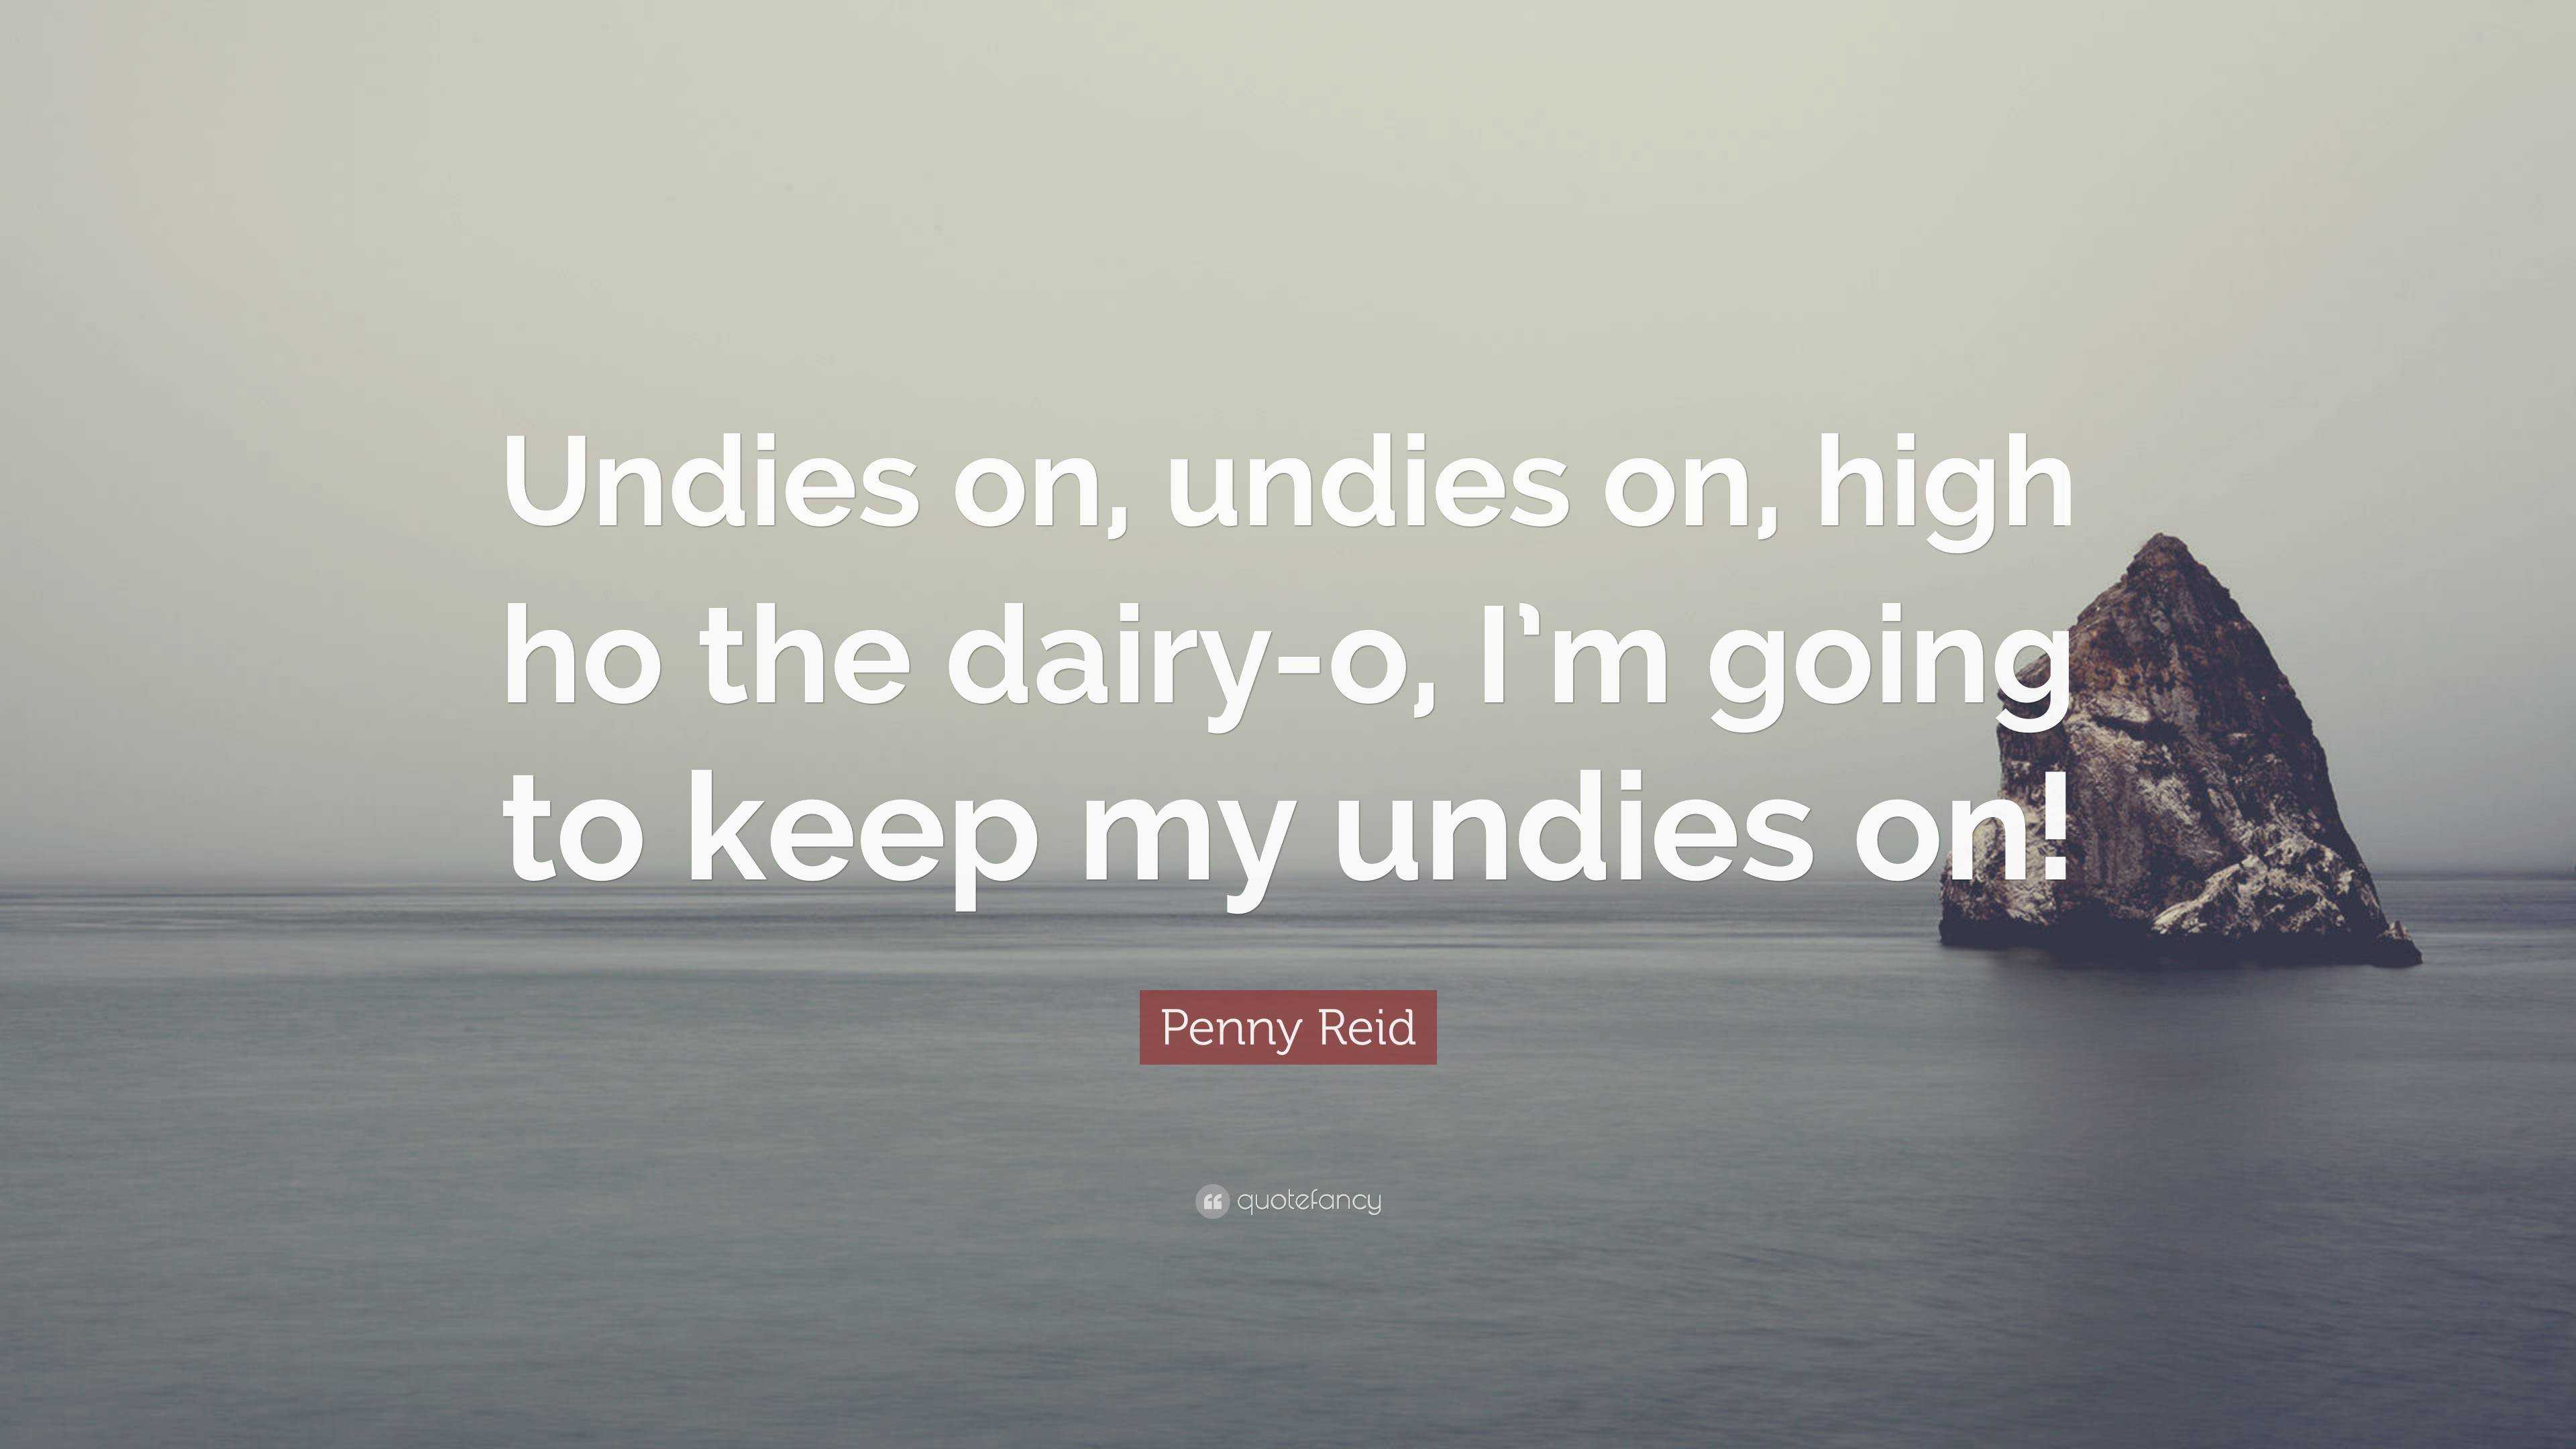 Penny Reid Quote: “Undies on, undies on, high ho the dairy-o, I'm going to